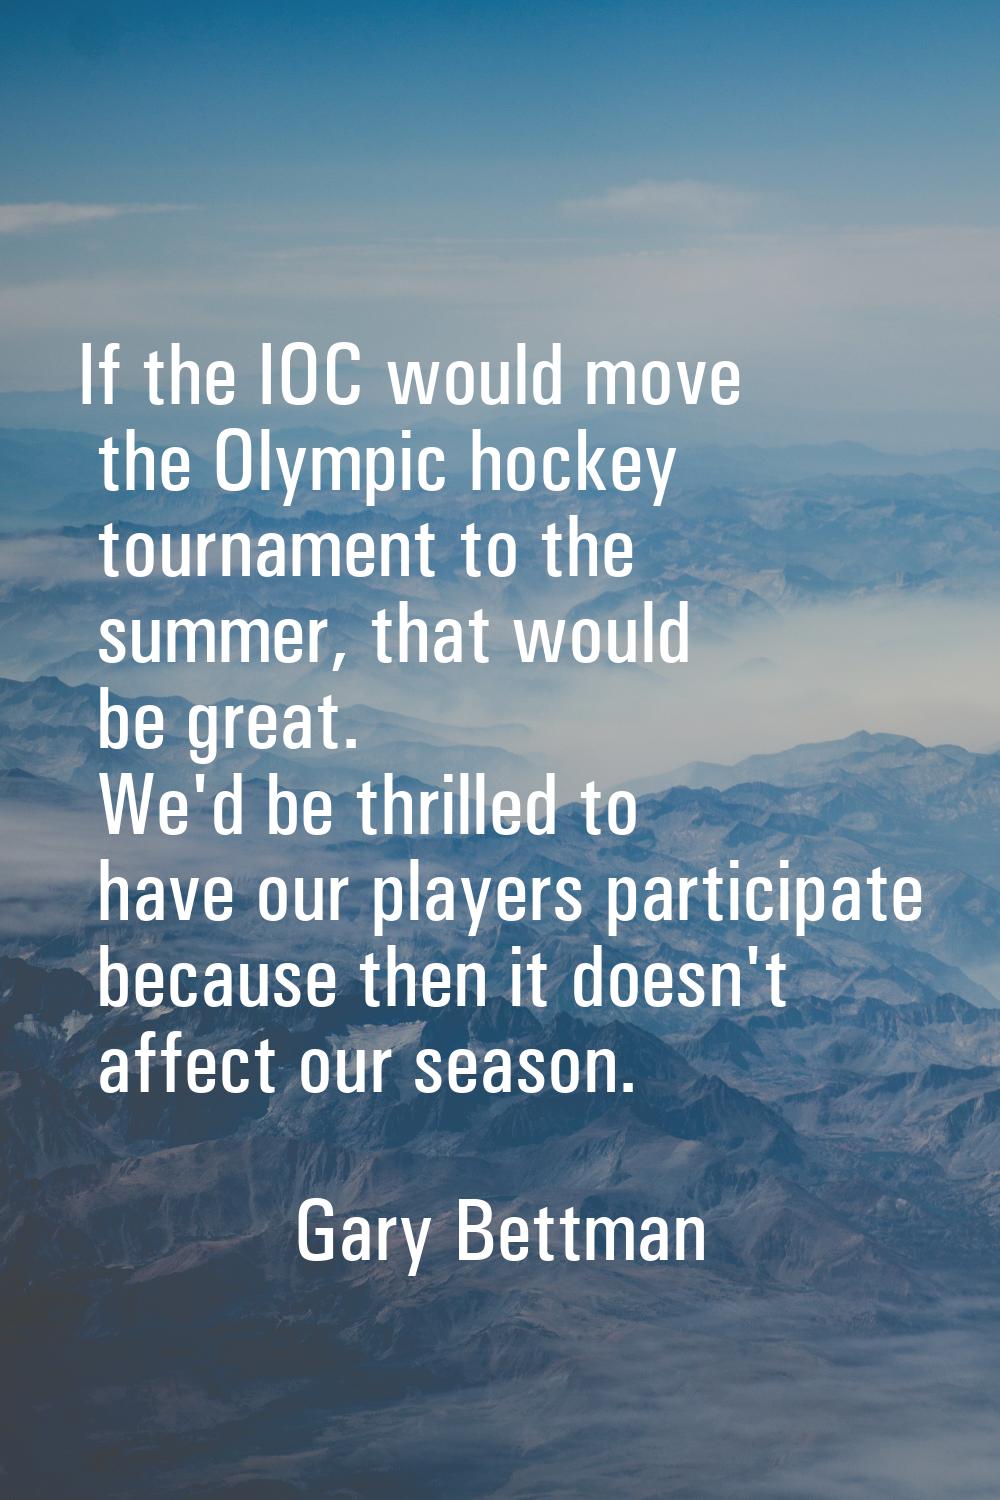 If the IOC would move the Olympic hockey tournament to the summer, that would be great. We'd be thr